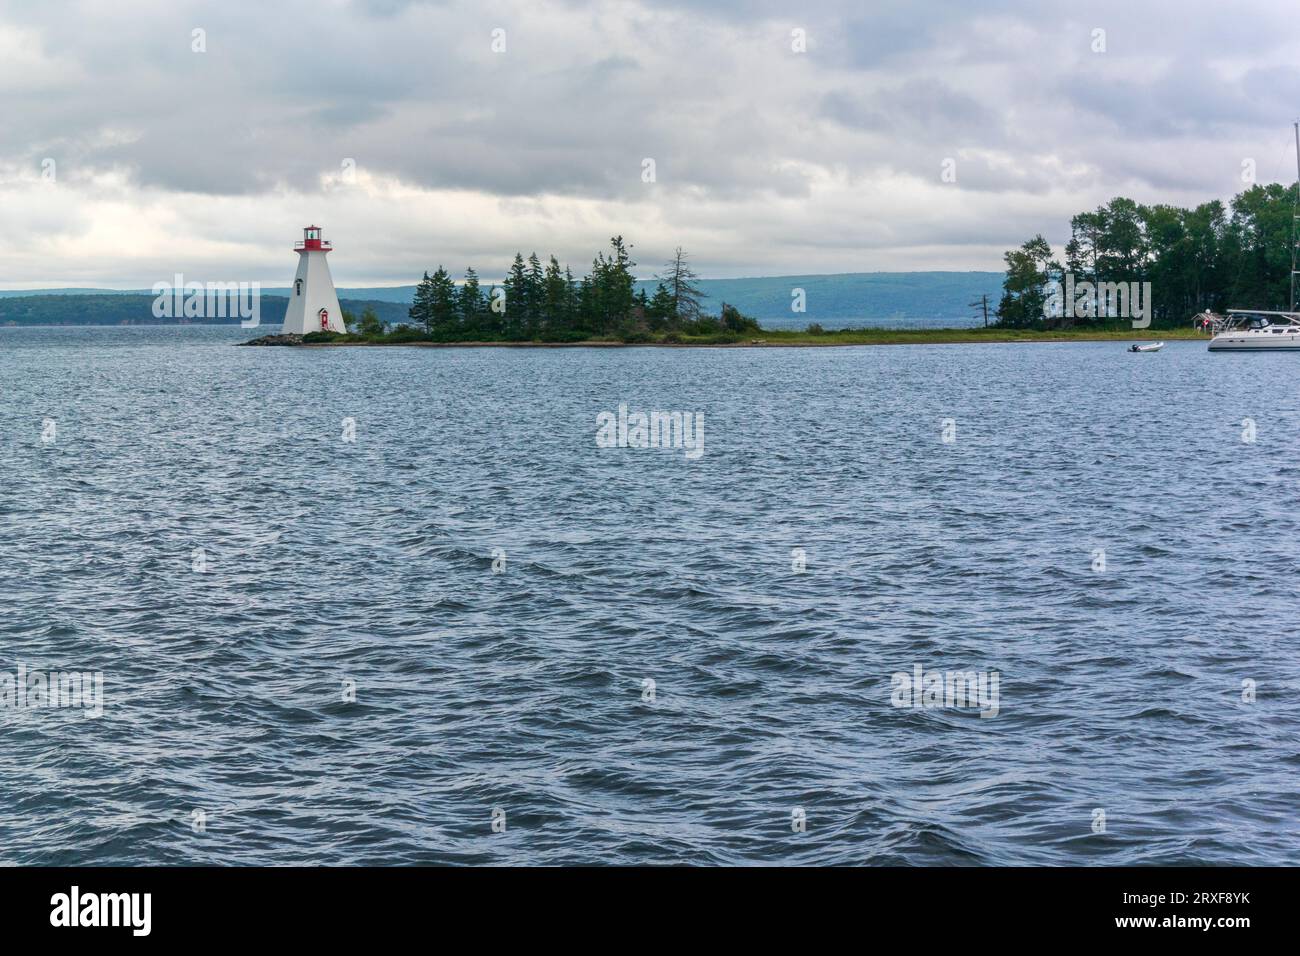 View of a lighthouse on an island against sky Stock Photo